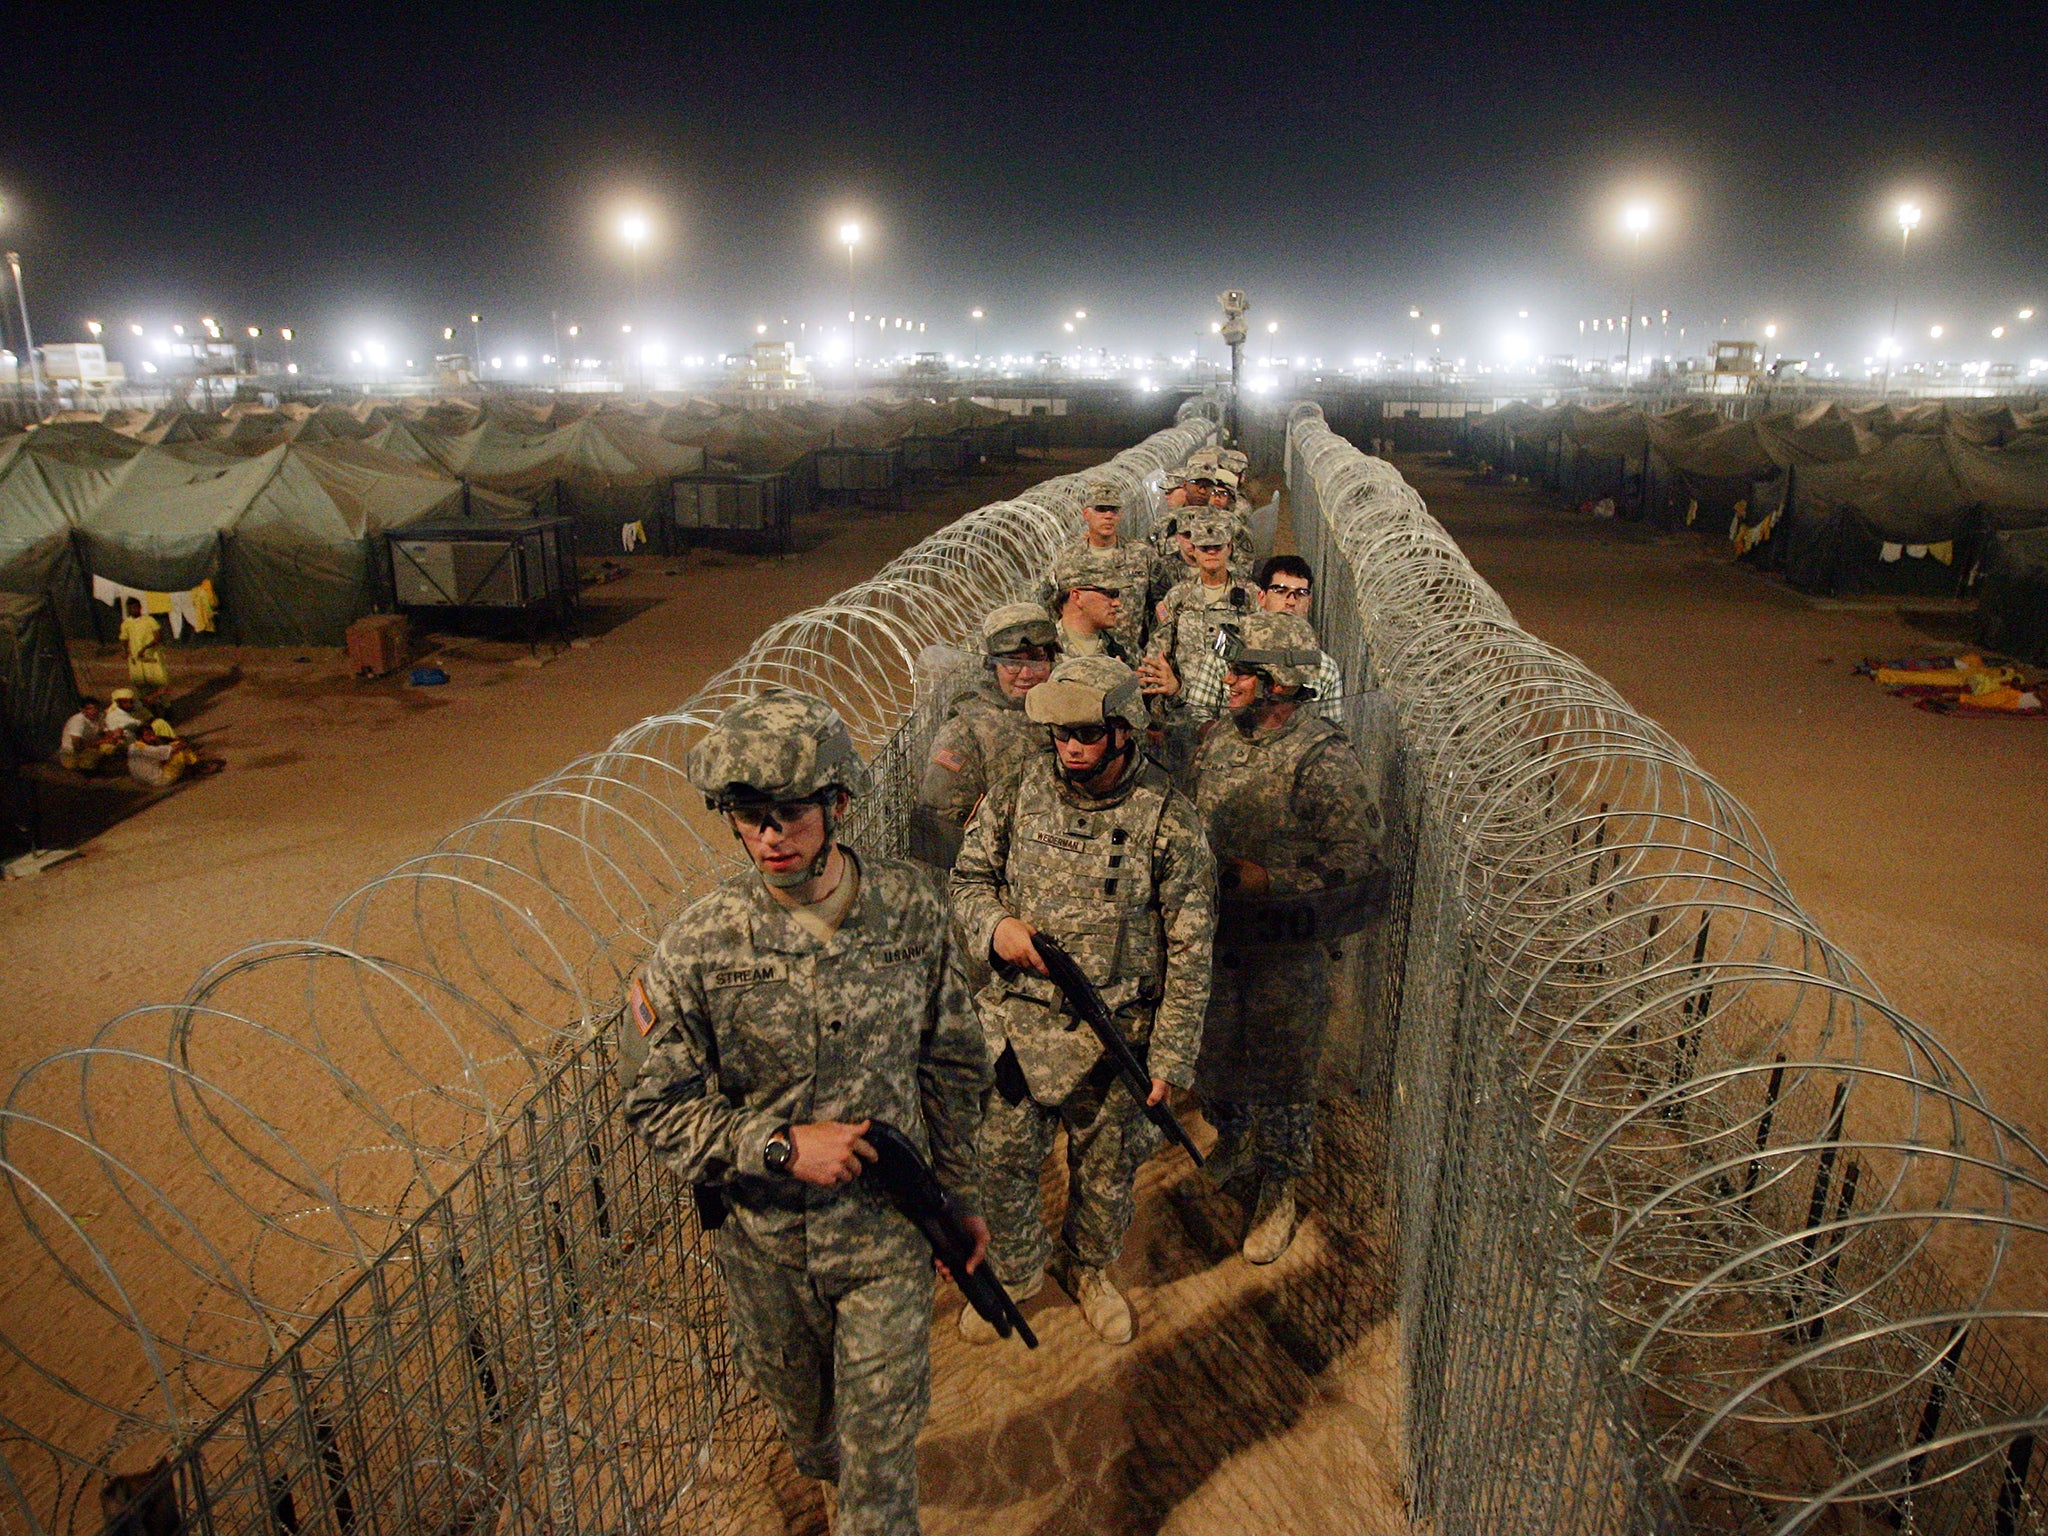 Camp Bucca The US prison that became the birthplace of Isis The Independent The Independent pic